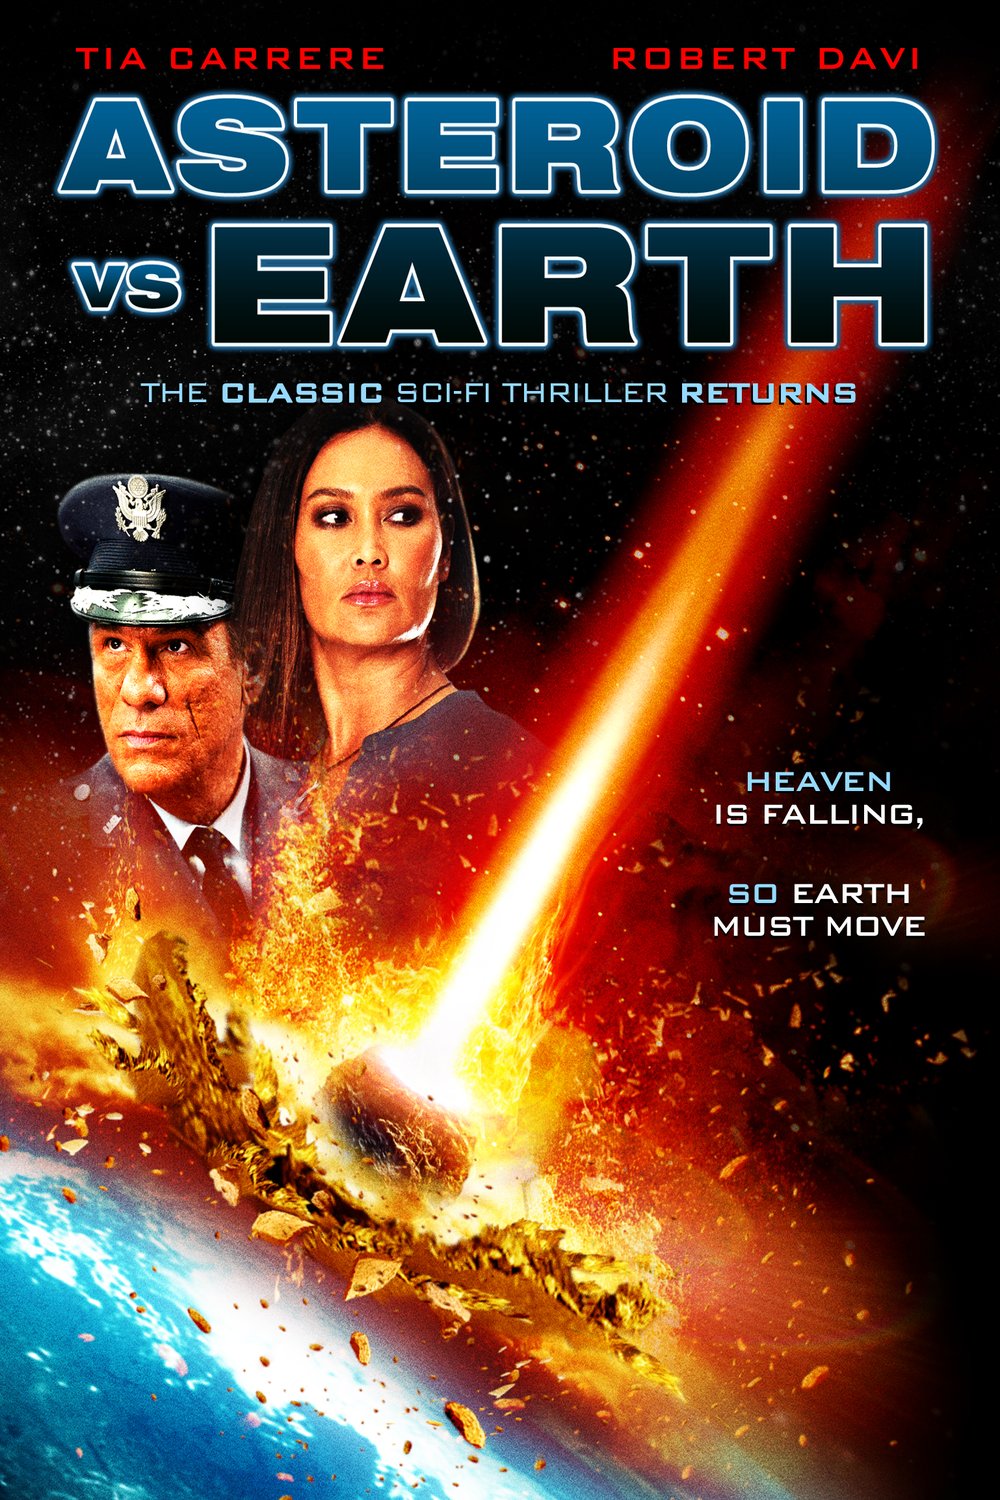 Poster of the movie Asteroid vs Earth